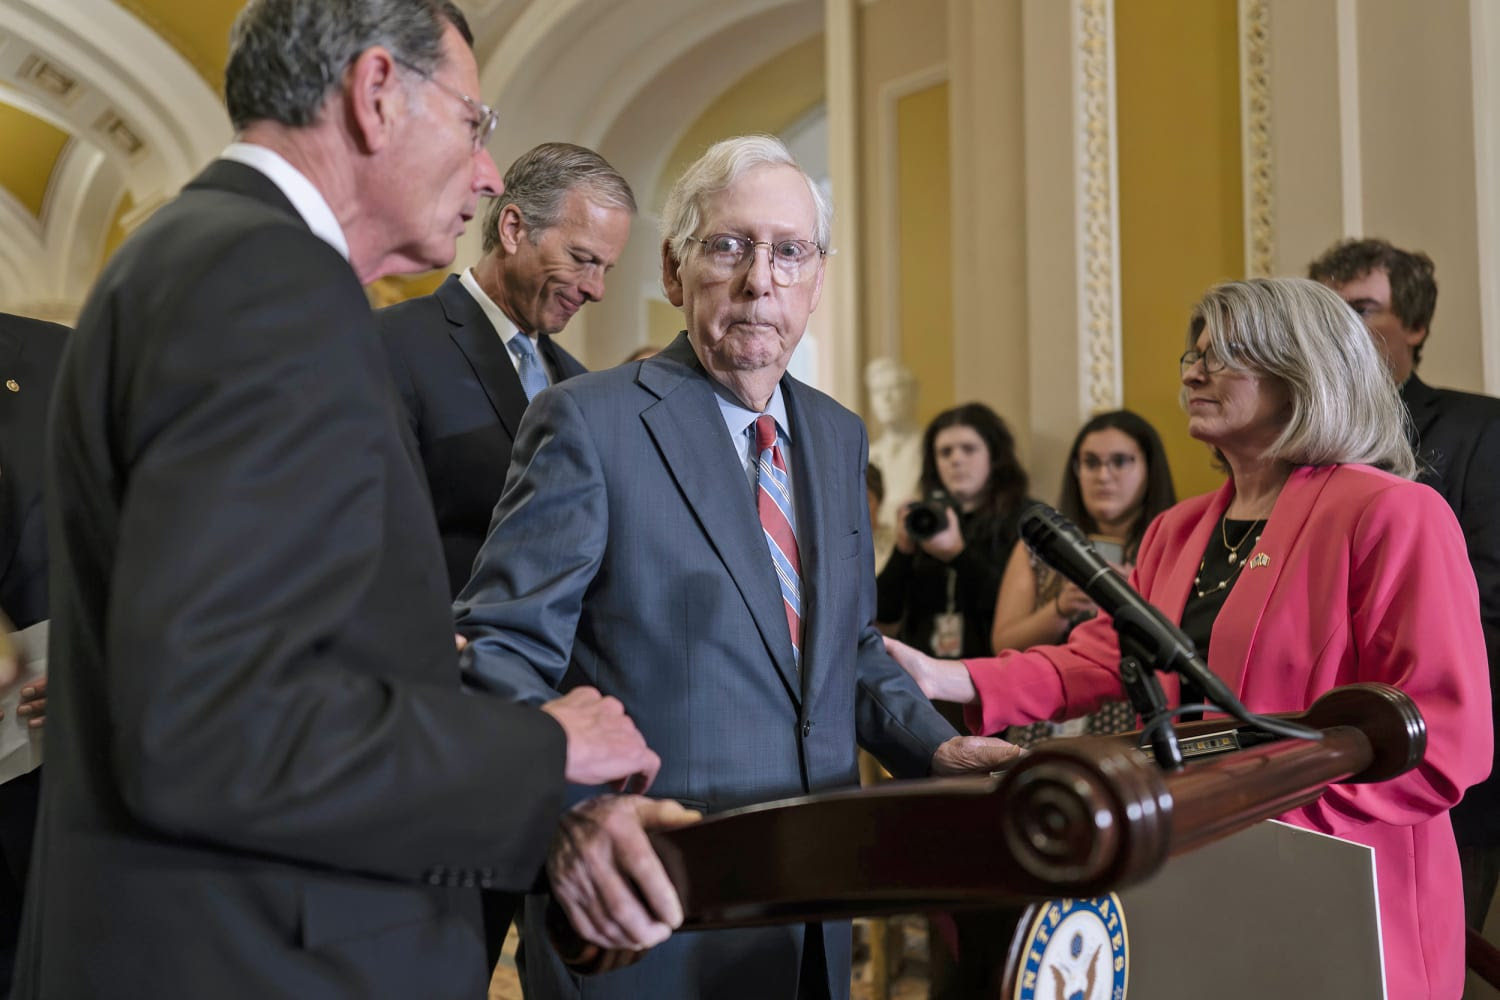 News - Sen. Mitch McConnell was escorted away from cameras after freezing during a news conference 230727-mitch-mcconnell-mn-1445-c5c339